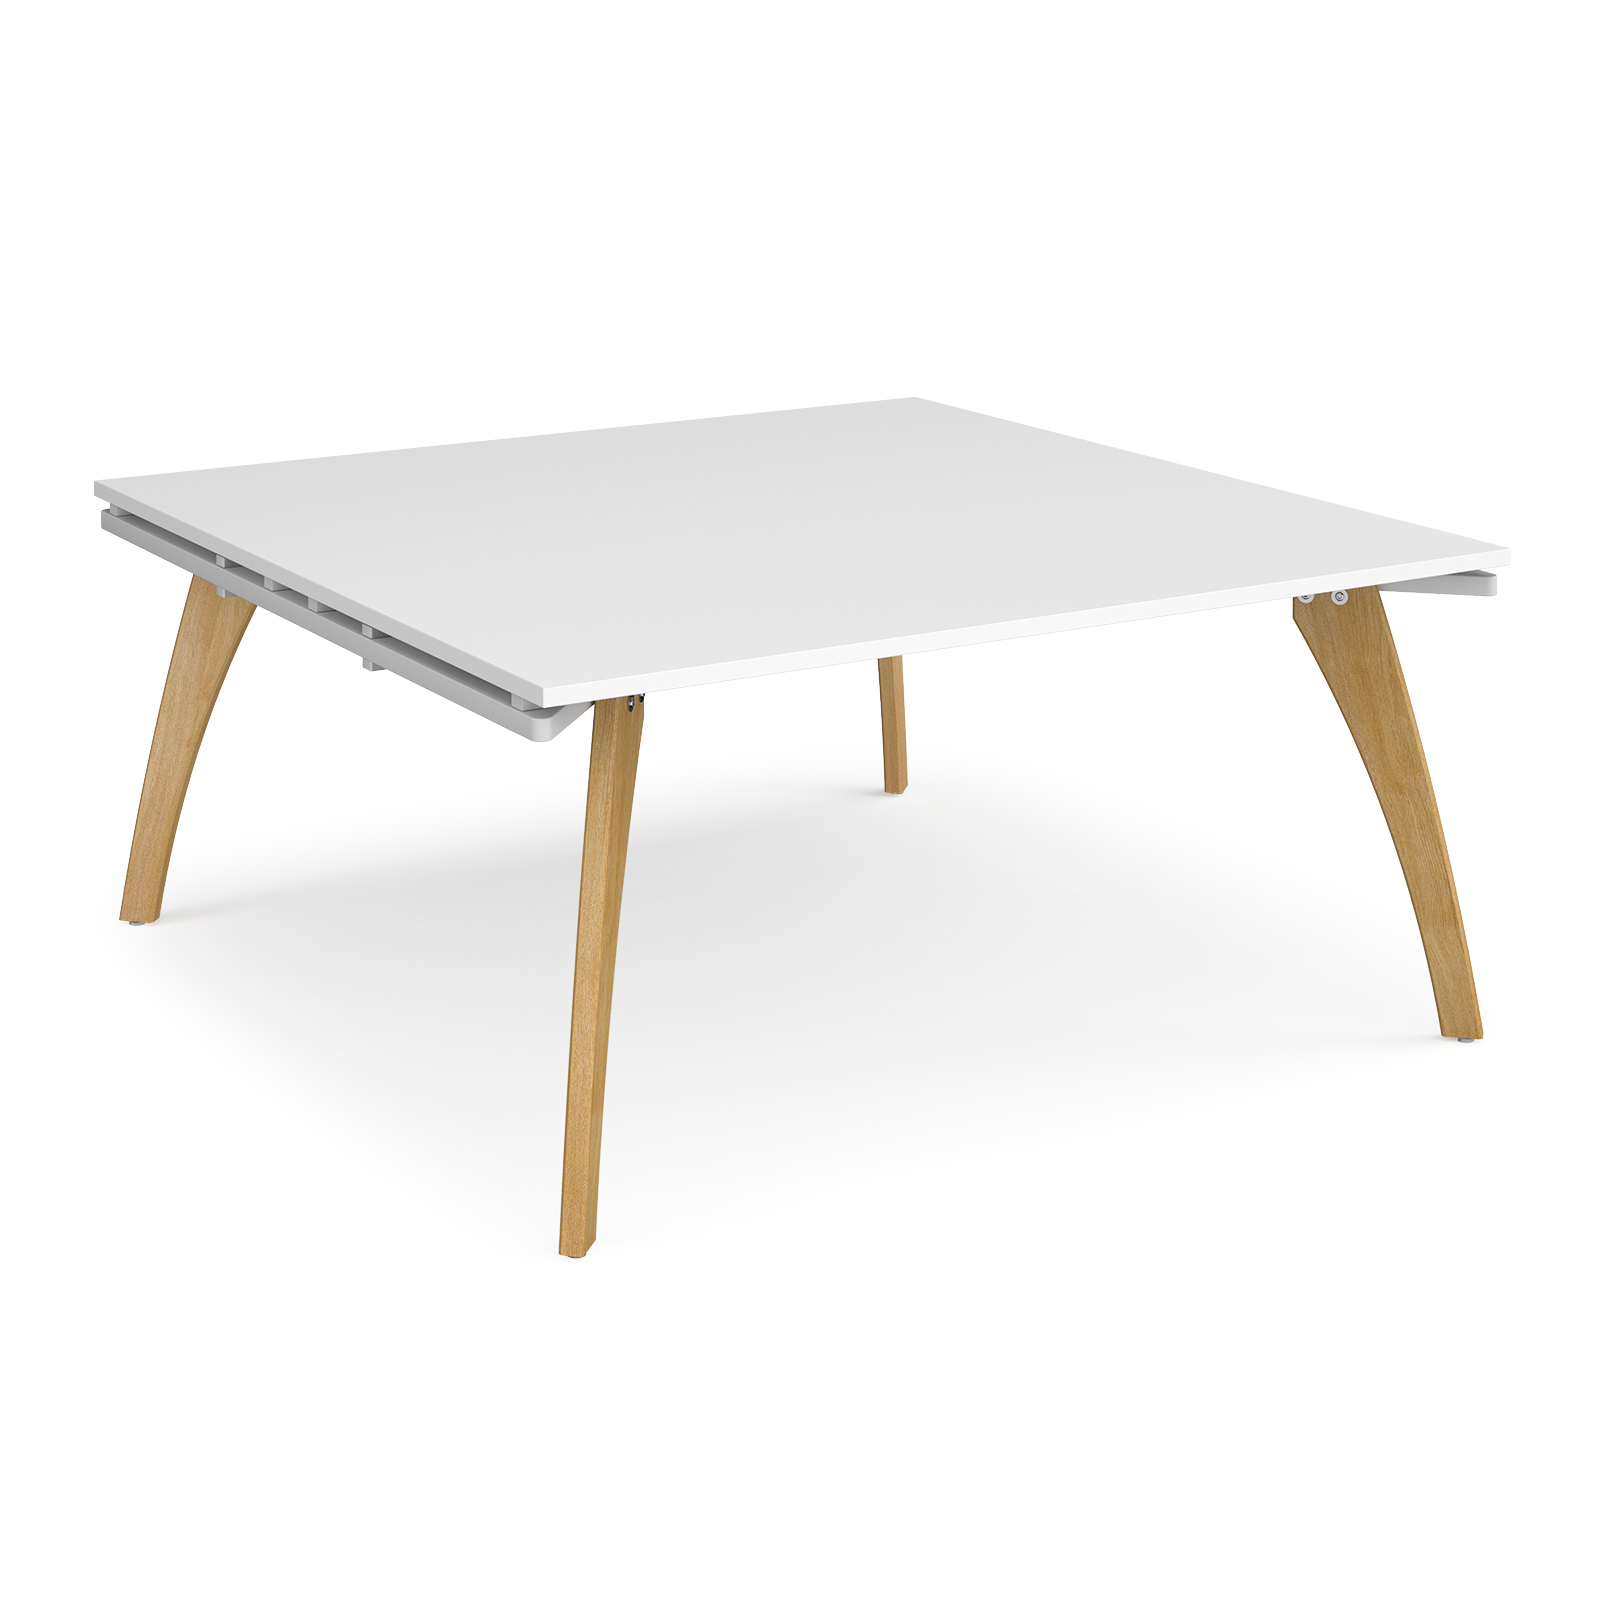 Fuze square boardroom table 1600mm x 1600mm - white frame, white top